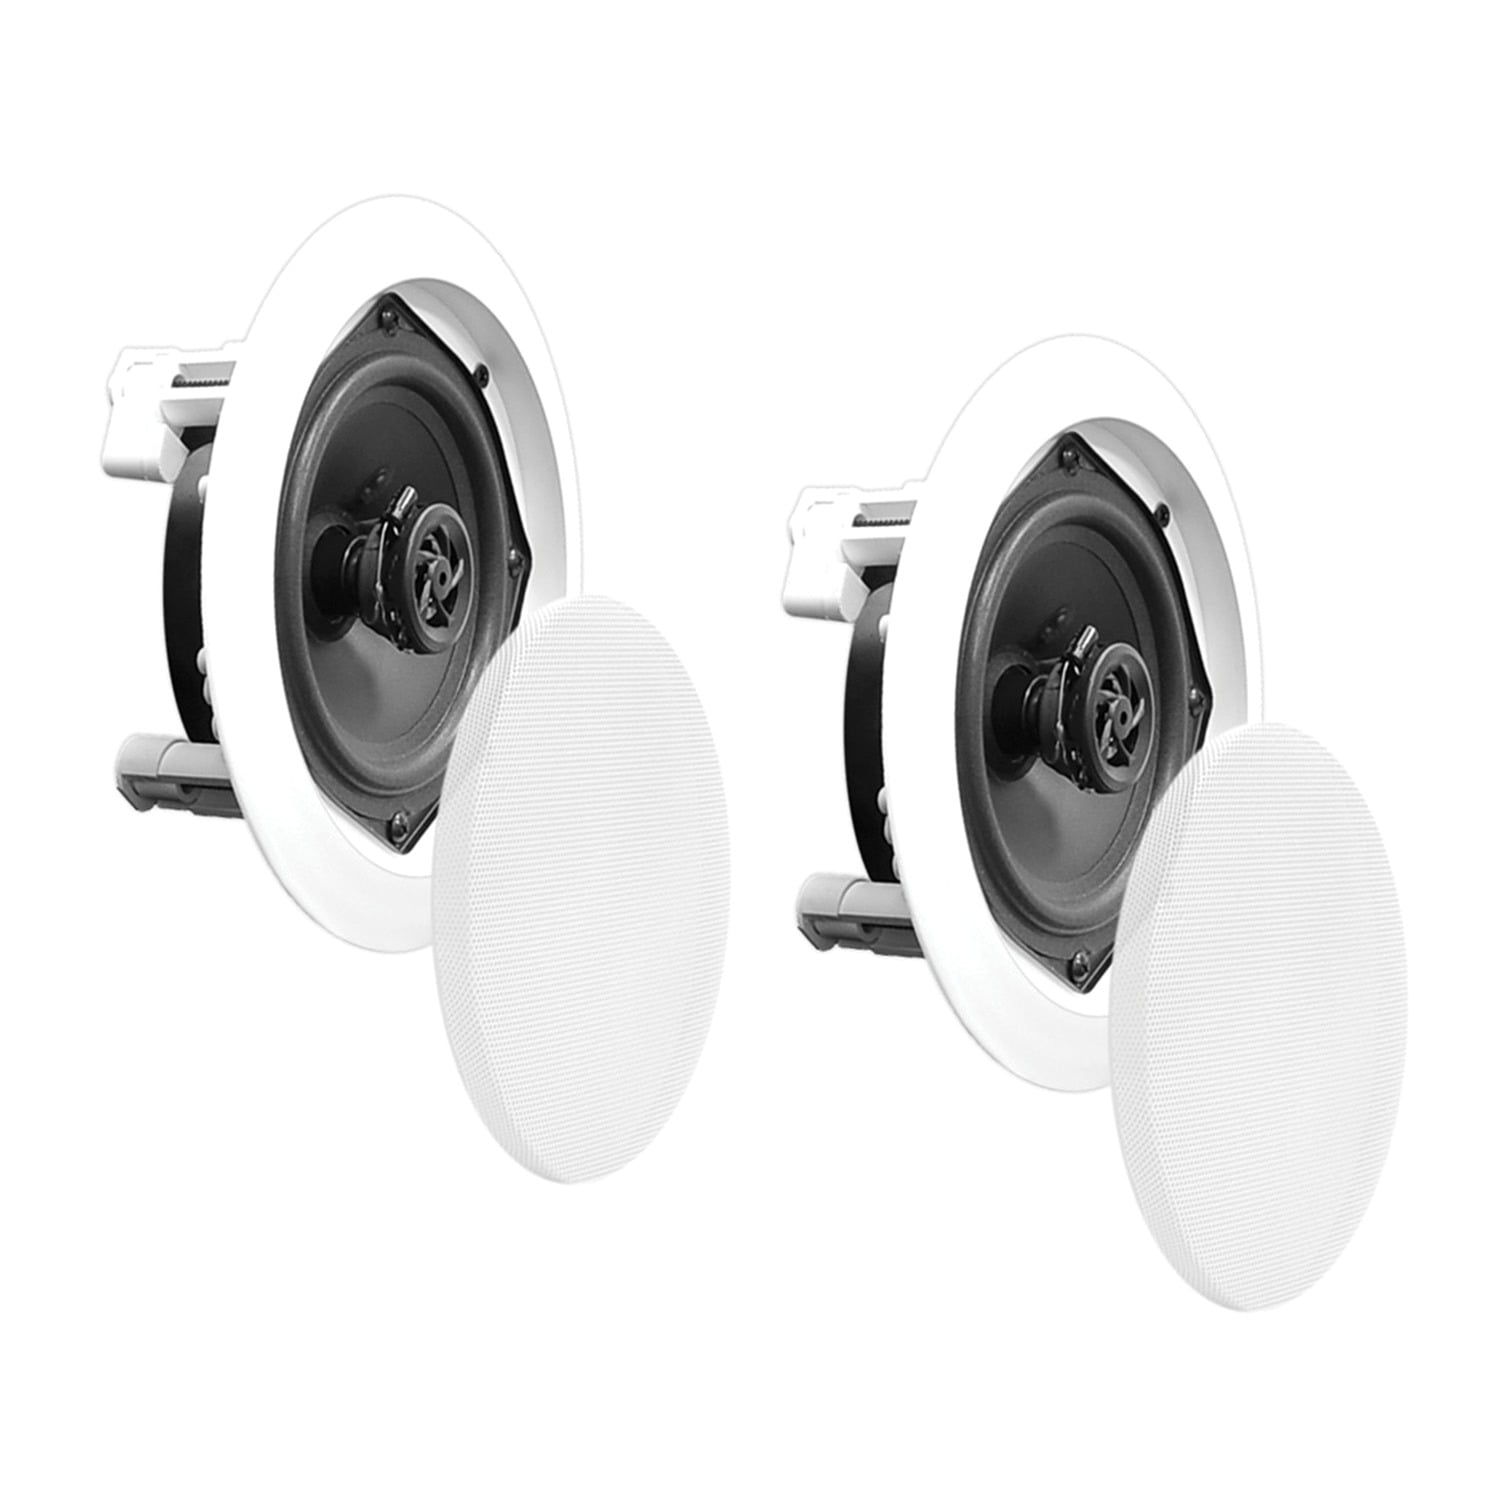 Pyle Surround Wall White Ceiling Home Speaker PDIC4CBTL3B Set of 4 